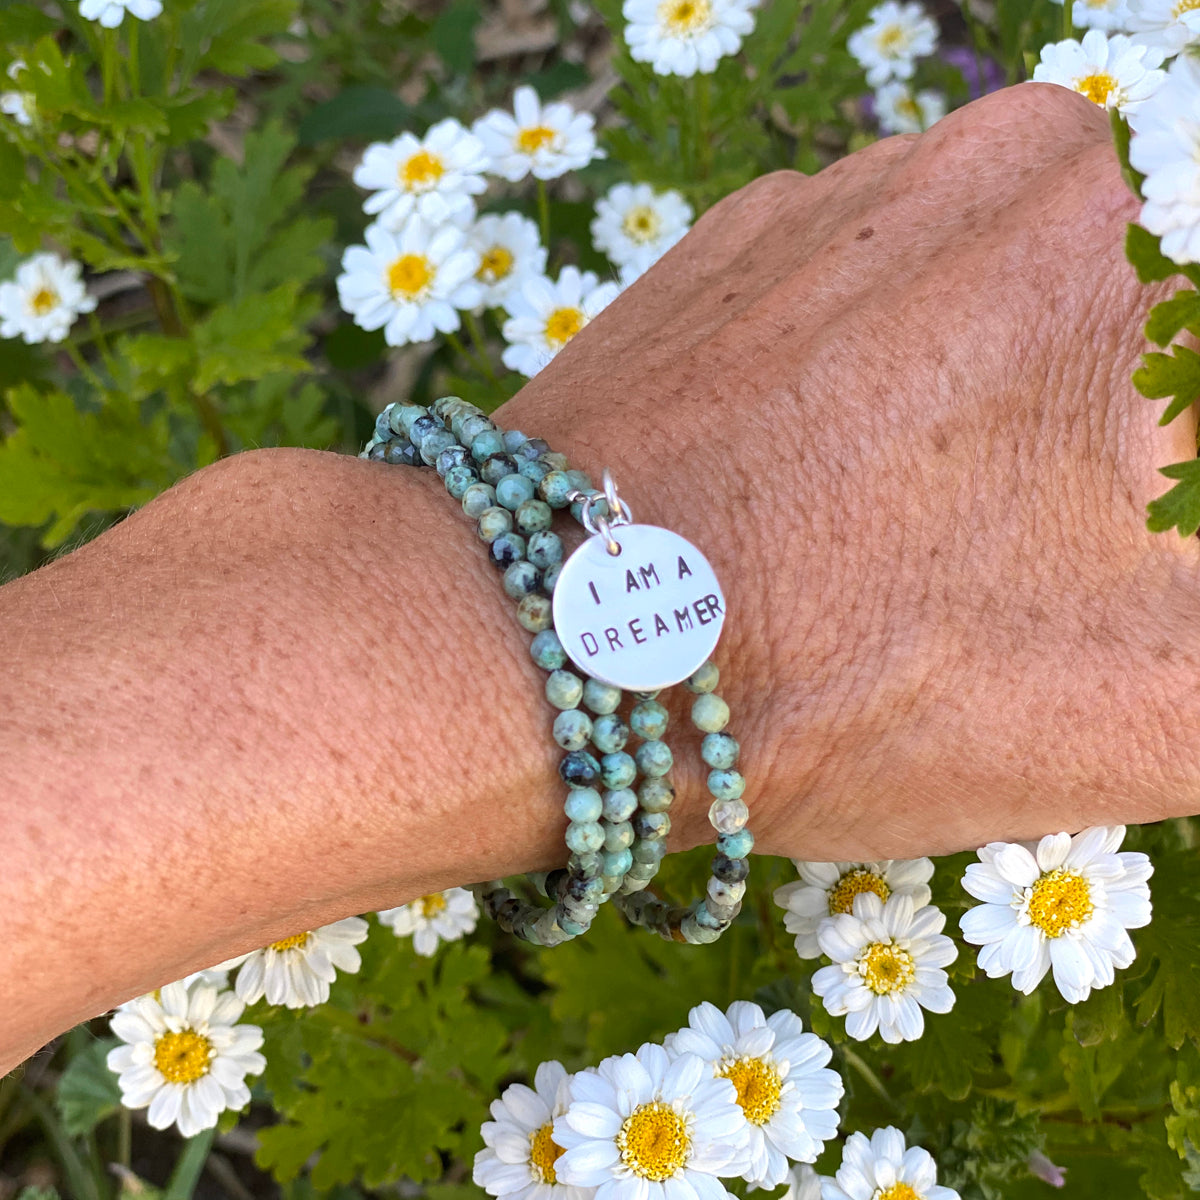 I am a Dreamer - Affirmation Bracelet and Wrap Bracelet with African Turquoise